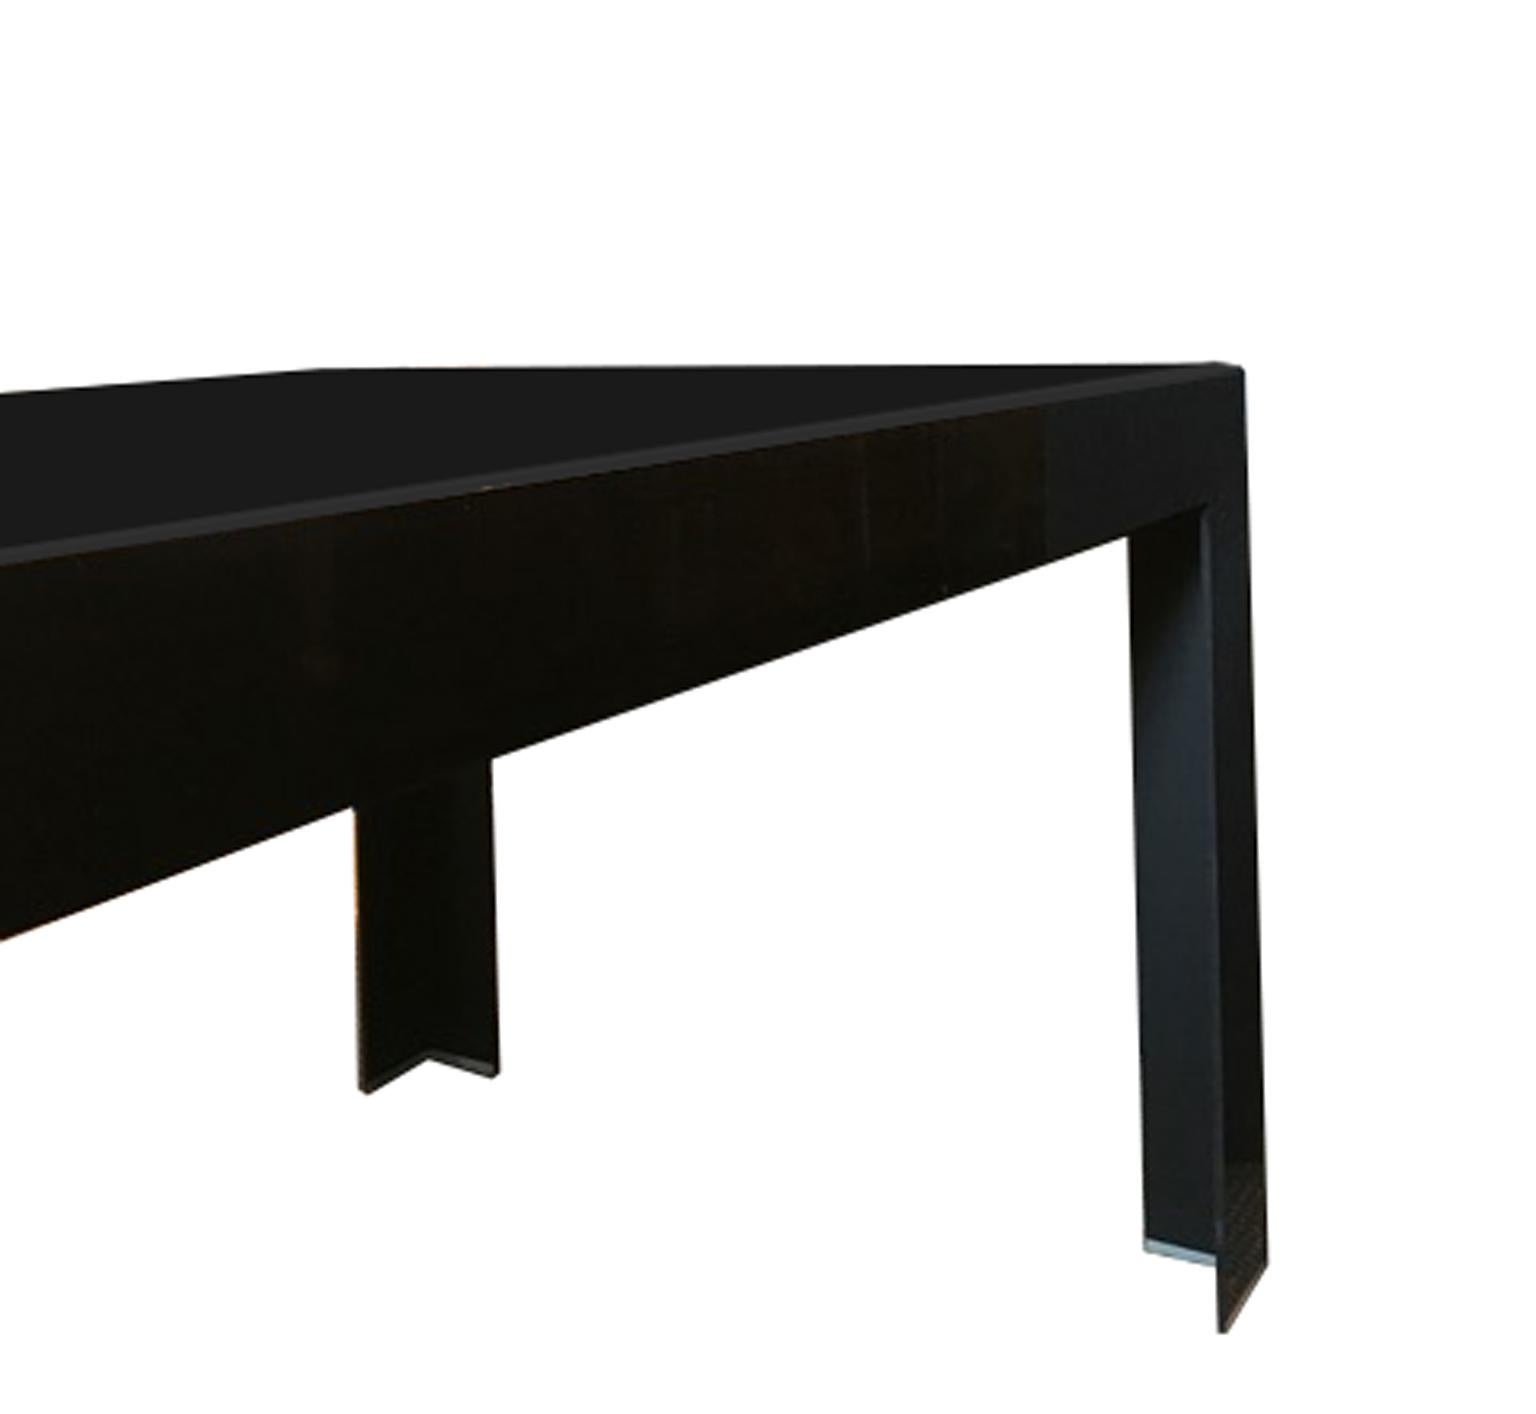 Italian Design Black Glass Dining Table in Minimal Style Contemporary Production For Sale 11